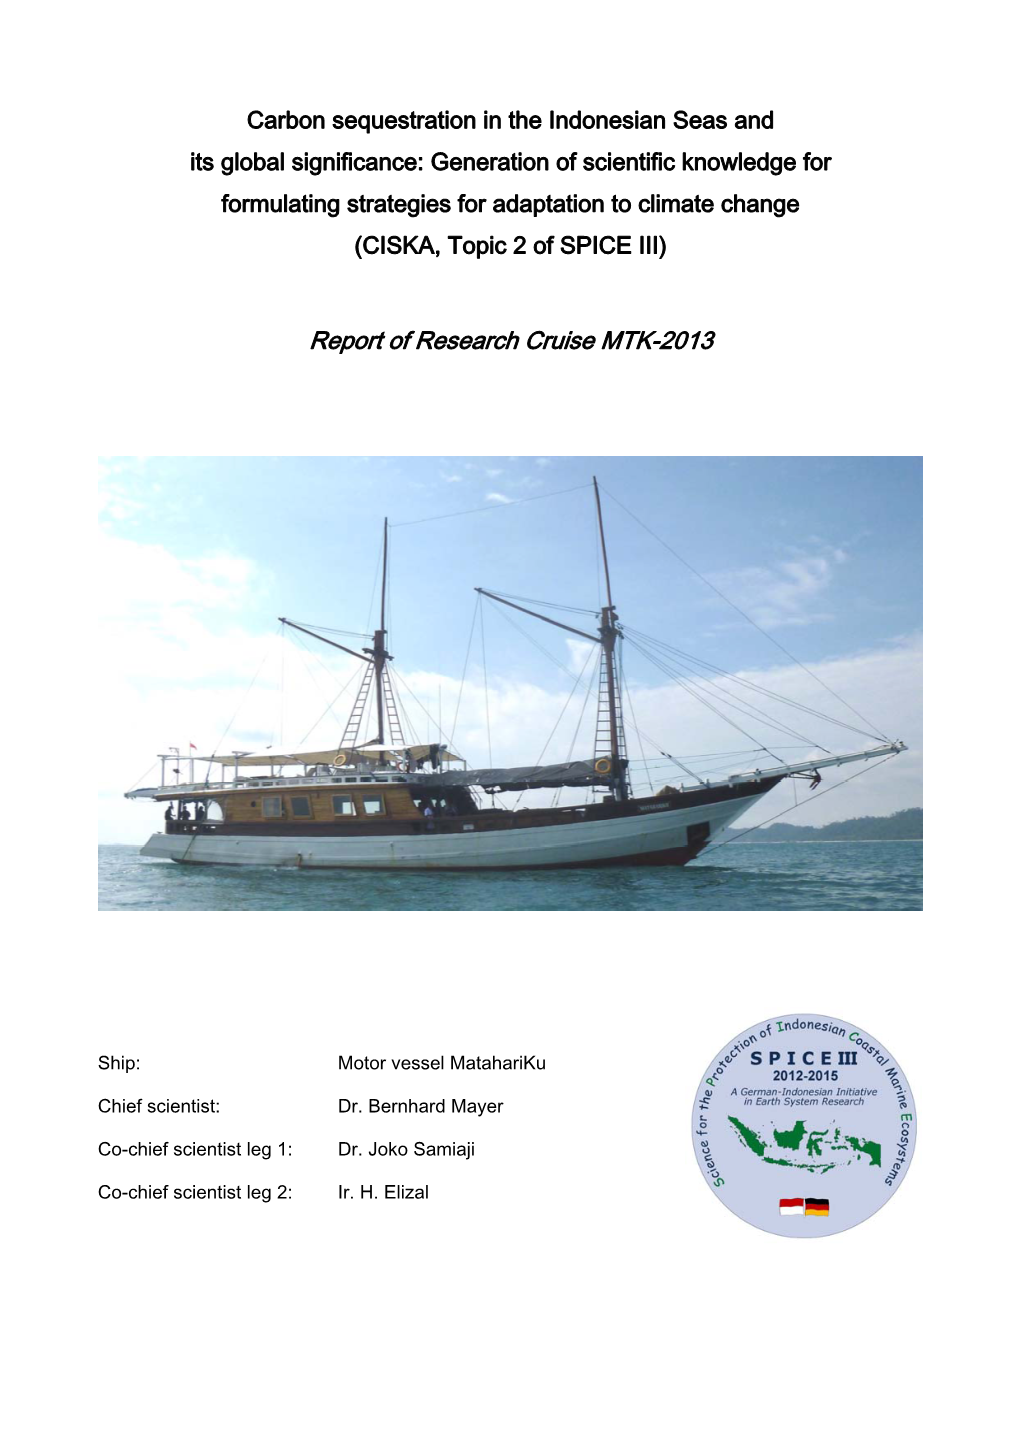 Report of Research Cruise MTK-2013